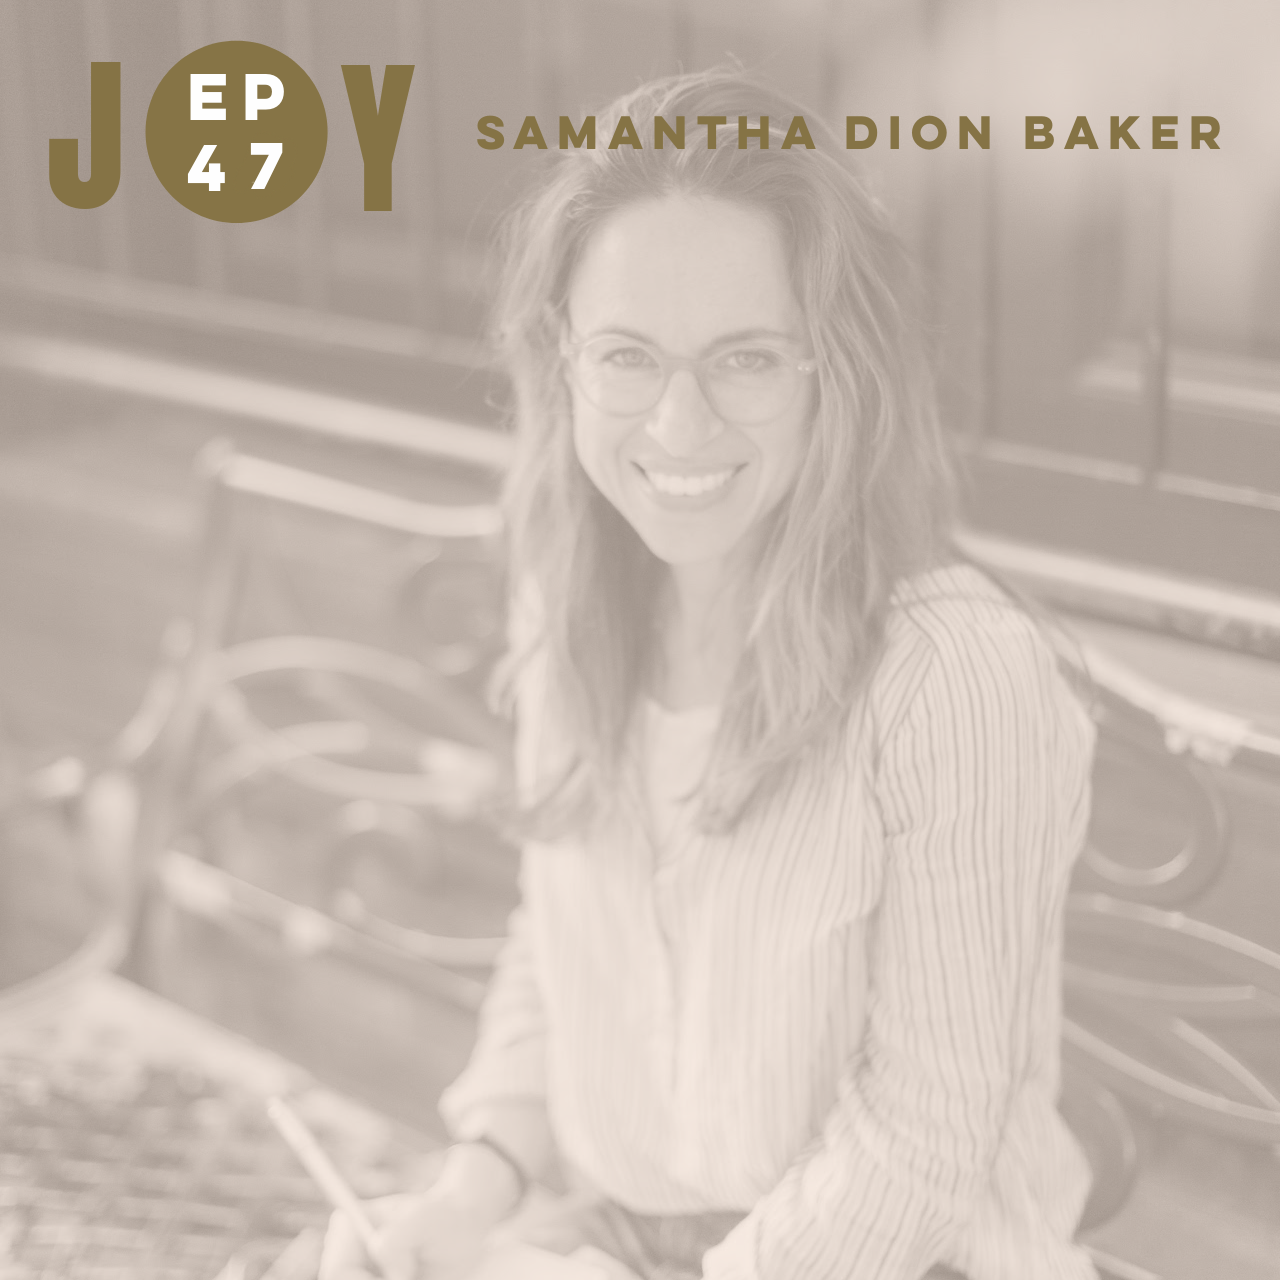 JOY IS NOW: THESE THREE THINGS WITH SAMANTHA DION BAKER